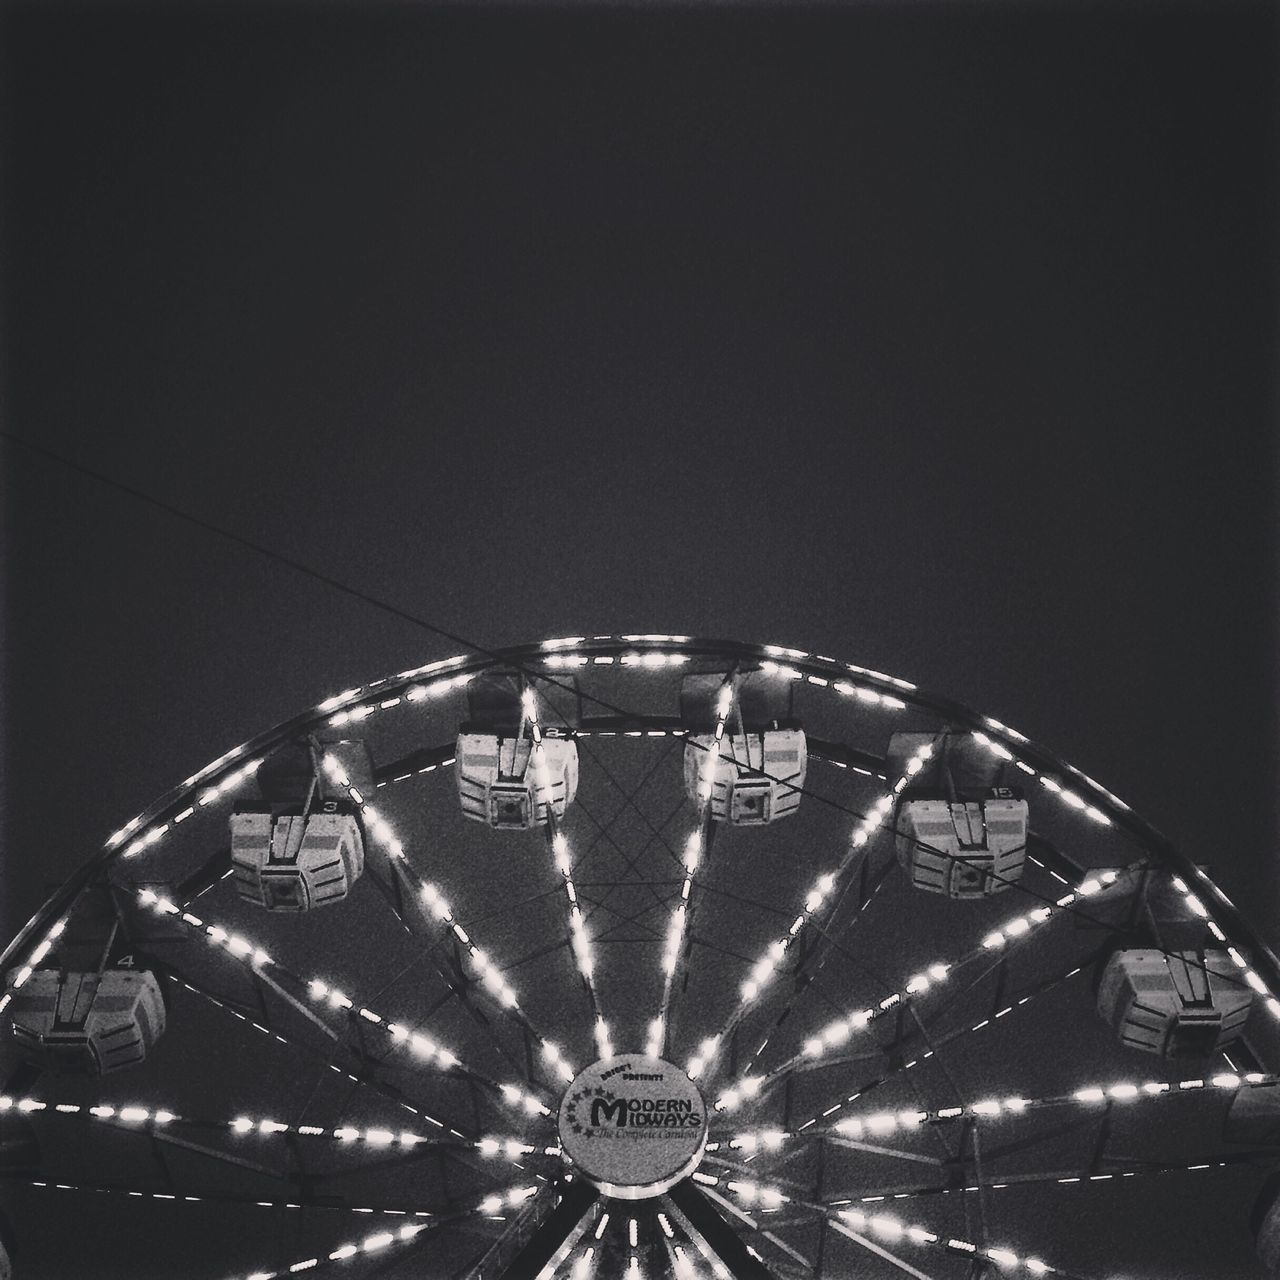 transportation, clear sky, night, ferris wheel, copy space, amusement park, illuminated, arts culture and entertainment, mode of transport, wheel, low angle view, amusement park ride, land vehicle, architecture, built structure, no people, outdoors, travel, time, circle